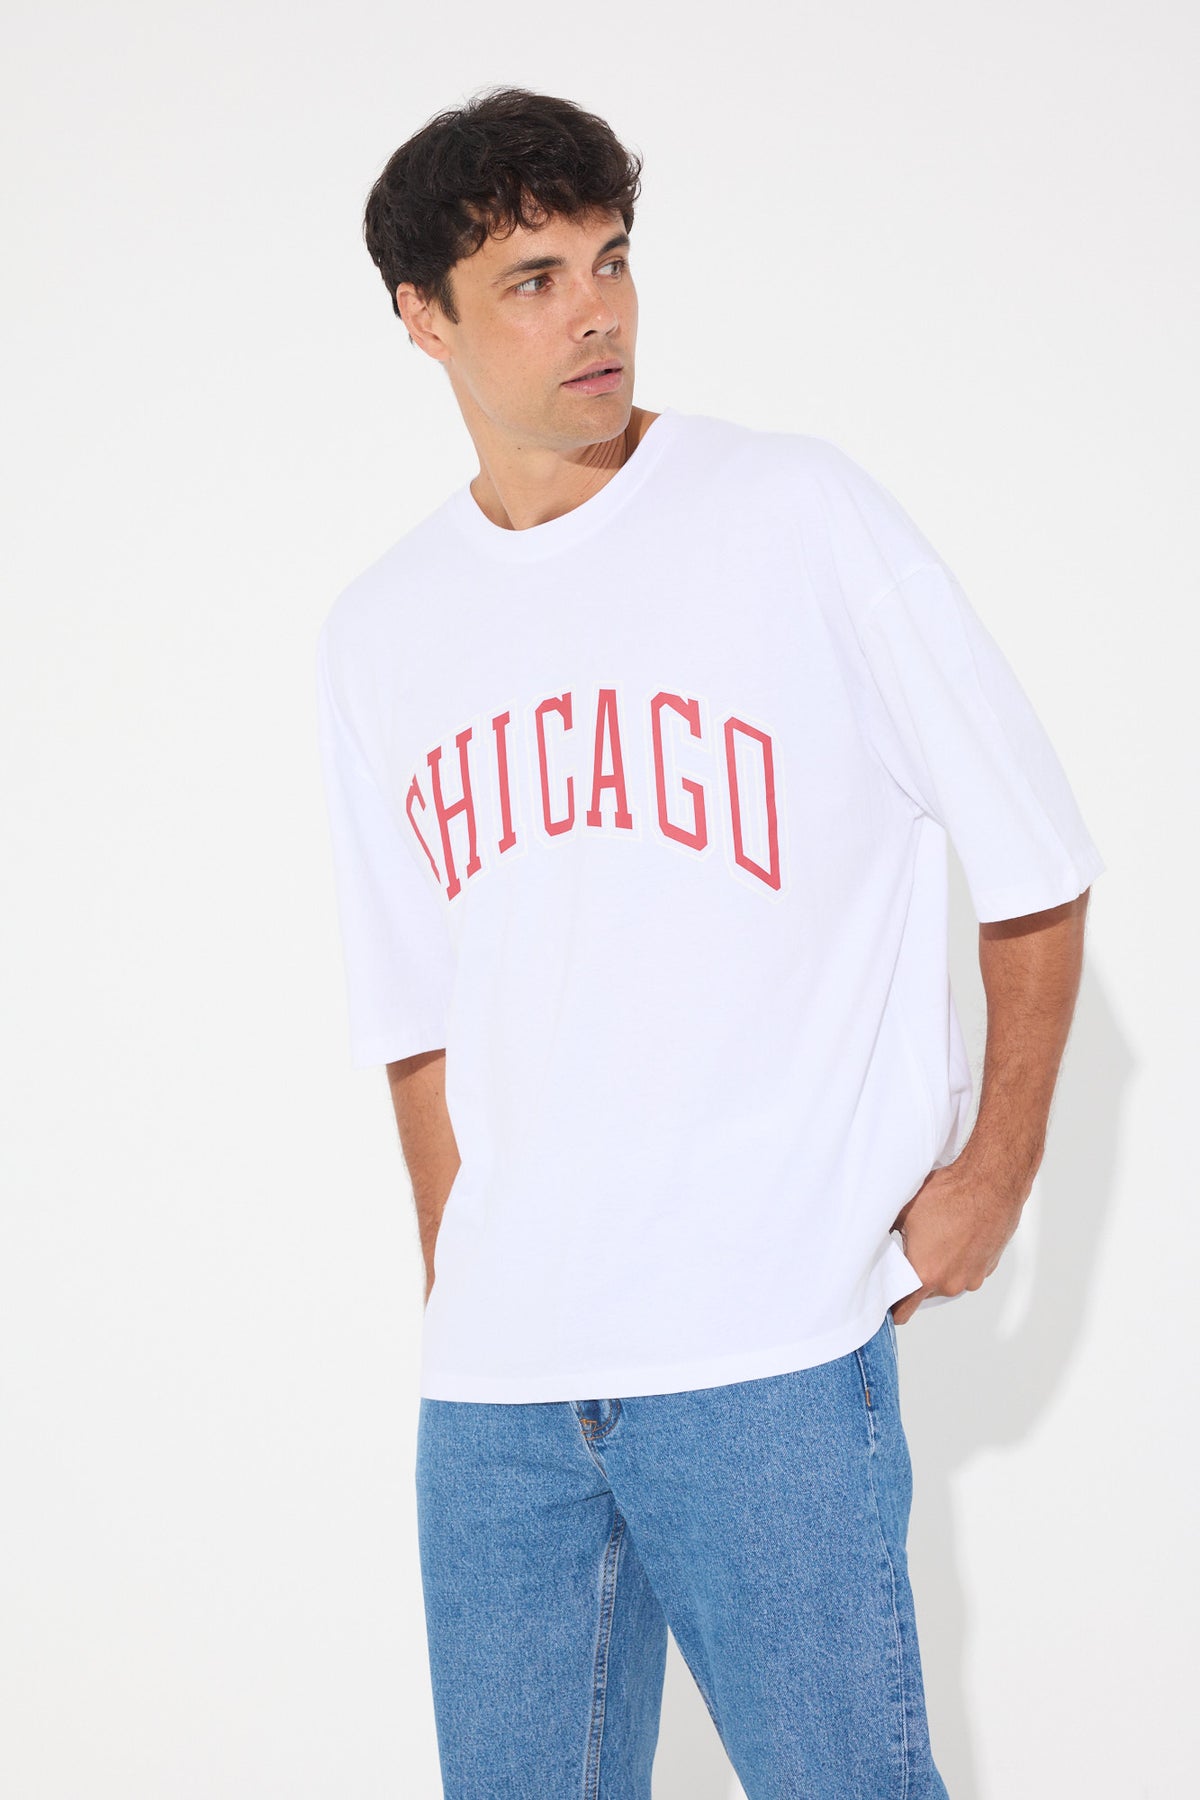 Tommy Tee Chicago Ivory